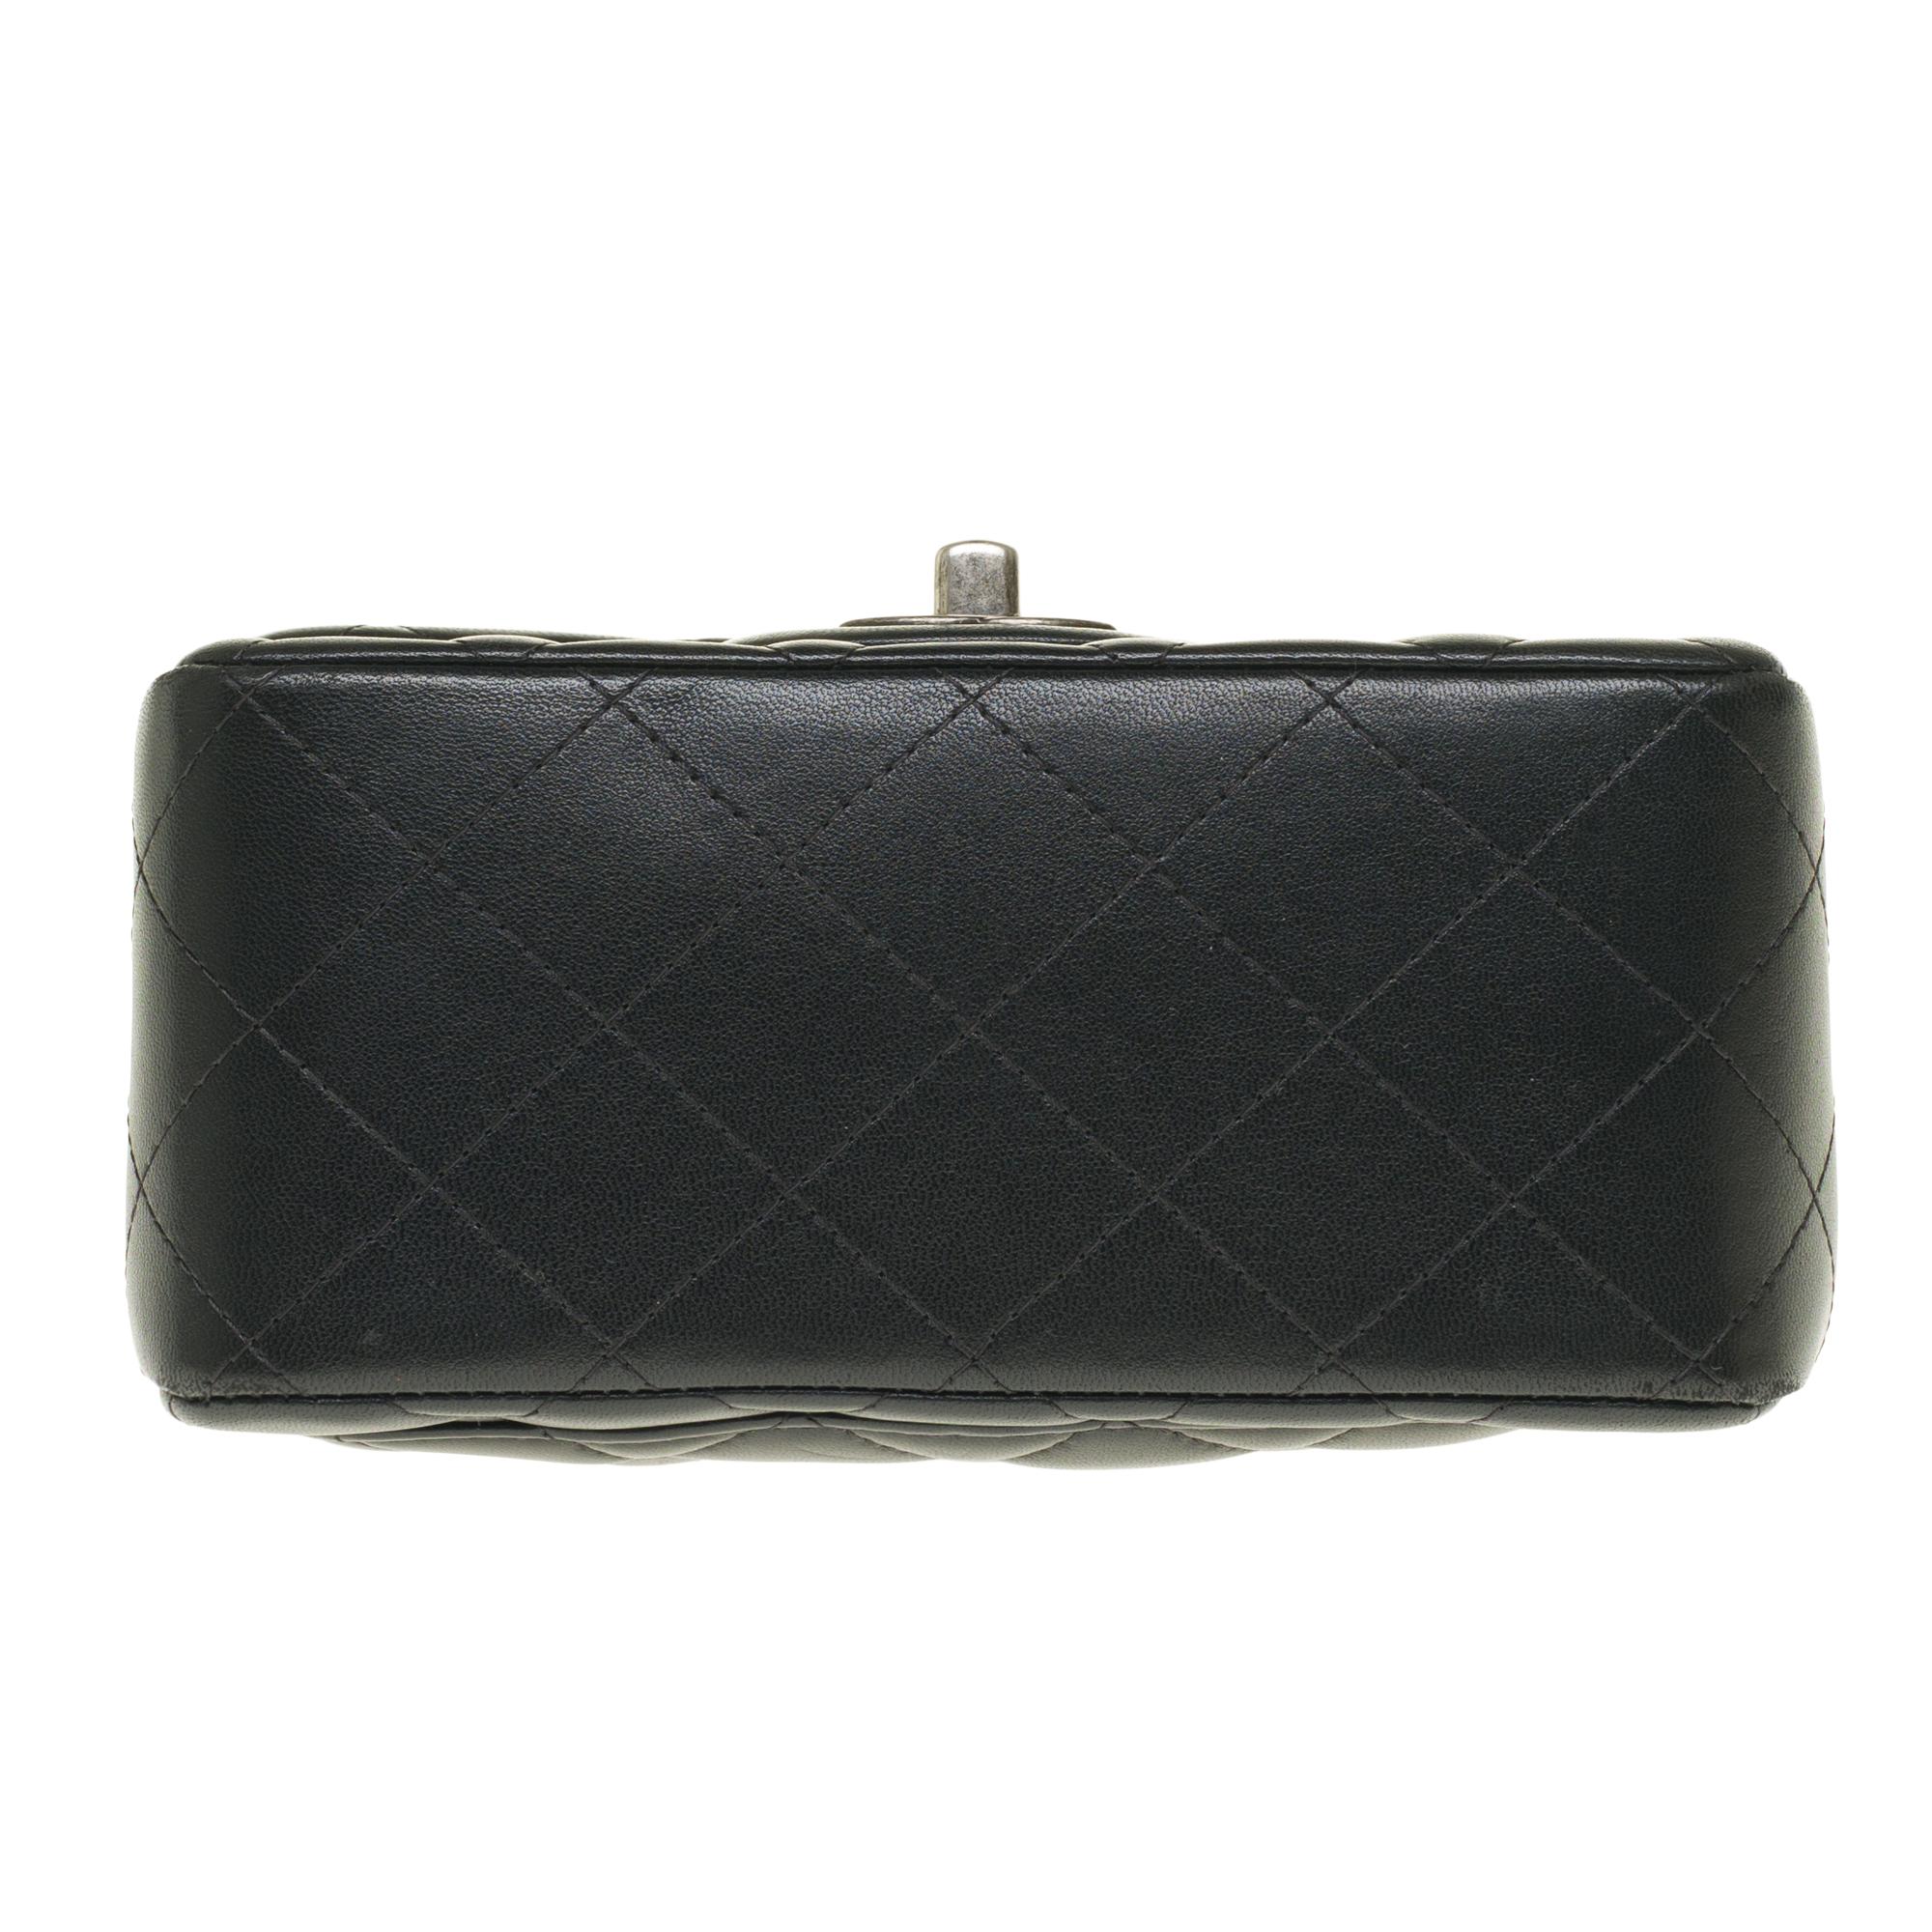 Chanel Mini square handbag in black quilted leather, Silver hardware 1